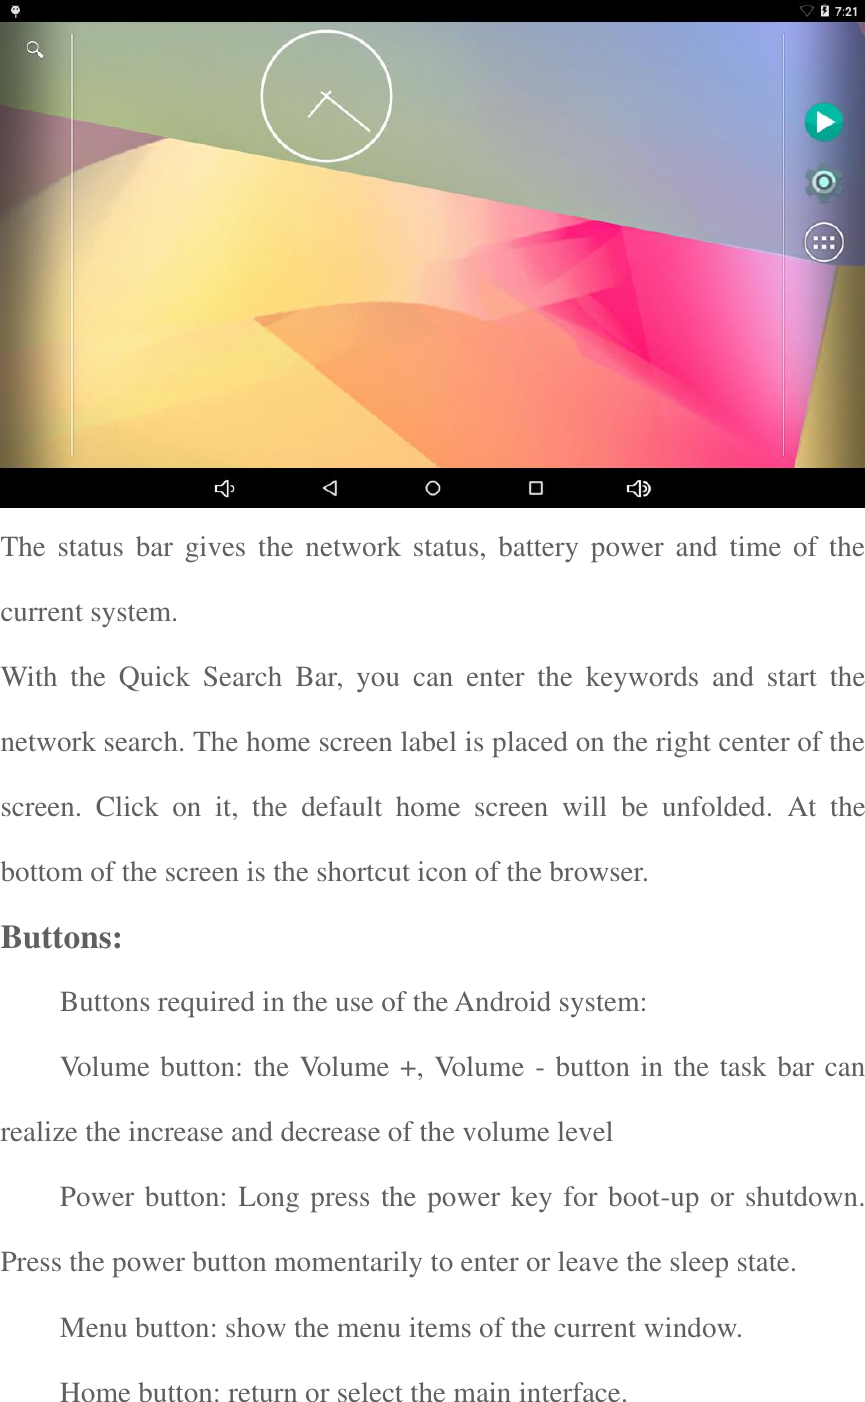   The  status bar gives  the  network  status, battery  power  and  time of the current system. With  the  Quick  Search  Bar,  you  can  enter  the  keywords  and  start  the network search. The home screen label is placed on the right center of the screen.  Click  on  it,  the  default  home  screen  will  be  unfolded.  At  the bottom of the screen is the shortcut icon of the browser.   Buttons:     Buttons required in the use of the Android system: Volume button: the Volume +, Volume - button in the task bar can realize the increase and decrease of the volume level Power button: Long press the power key for boot-up or shutdown. Press the power button momentarily to enter or leave the sleep state.   Menu button: show the menu items of the current window.   Home button: return or select the main interface.   